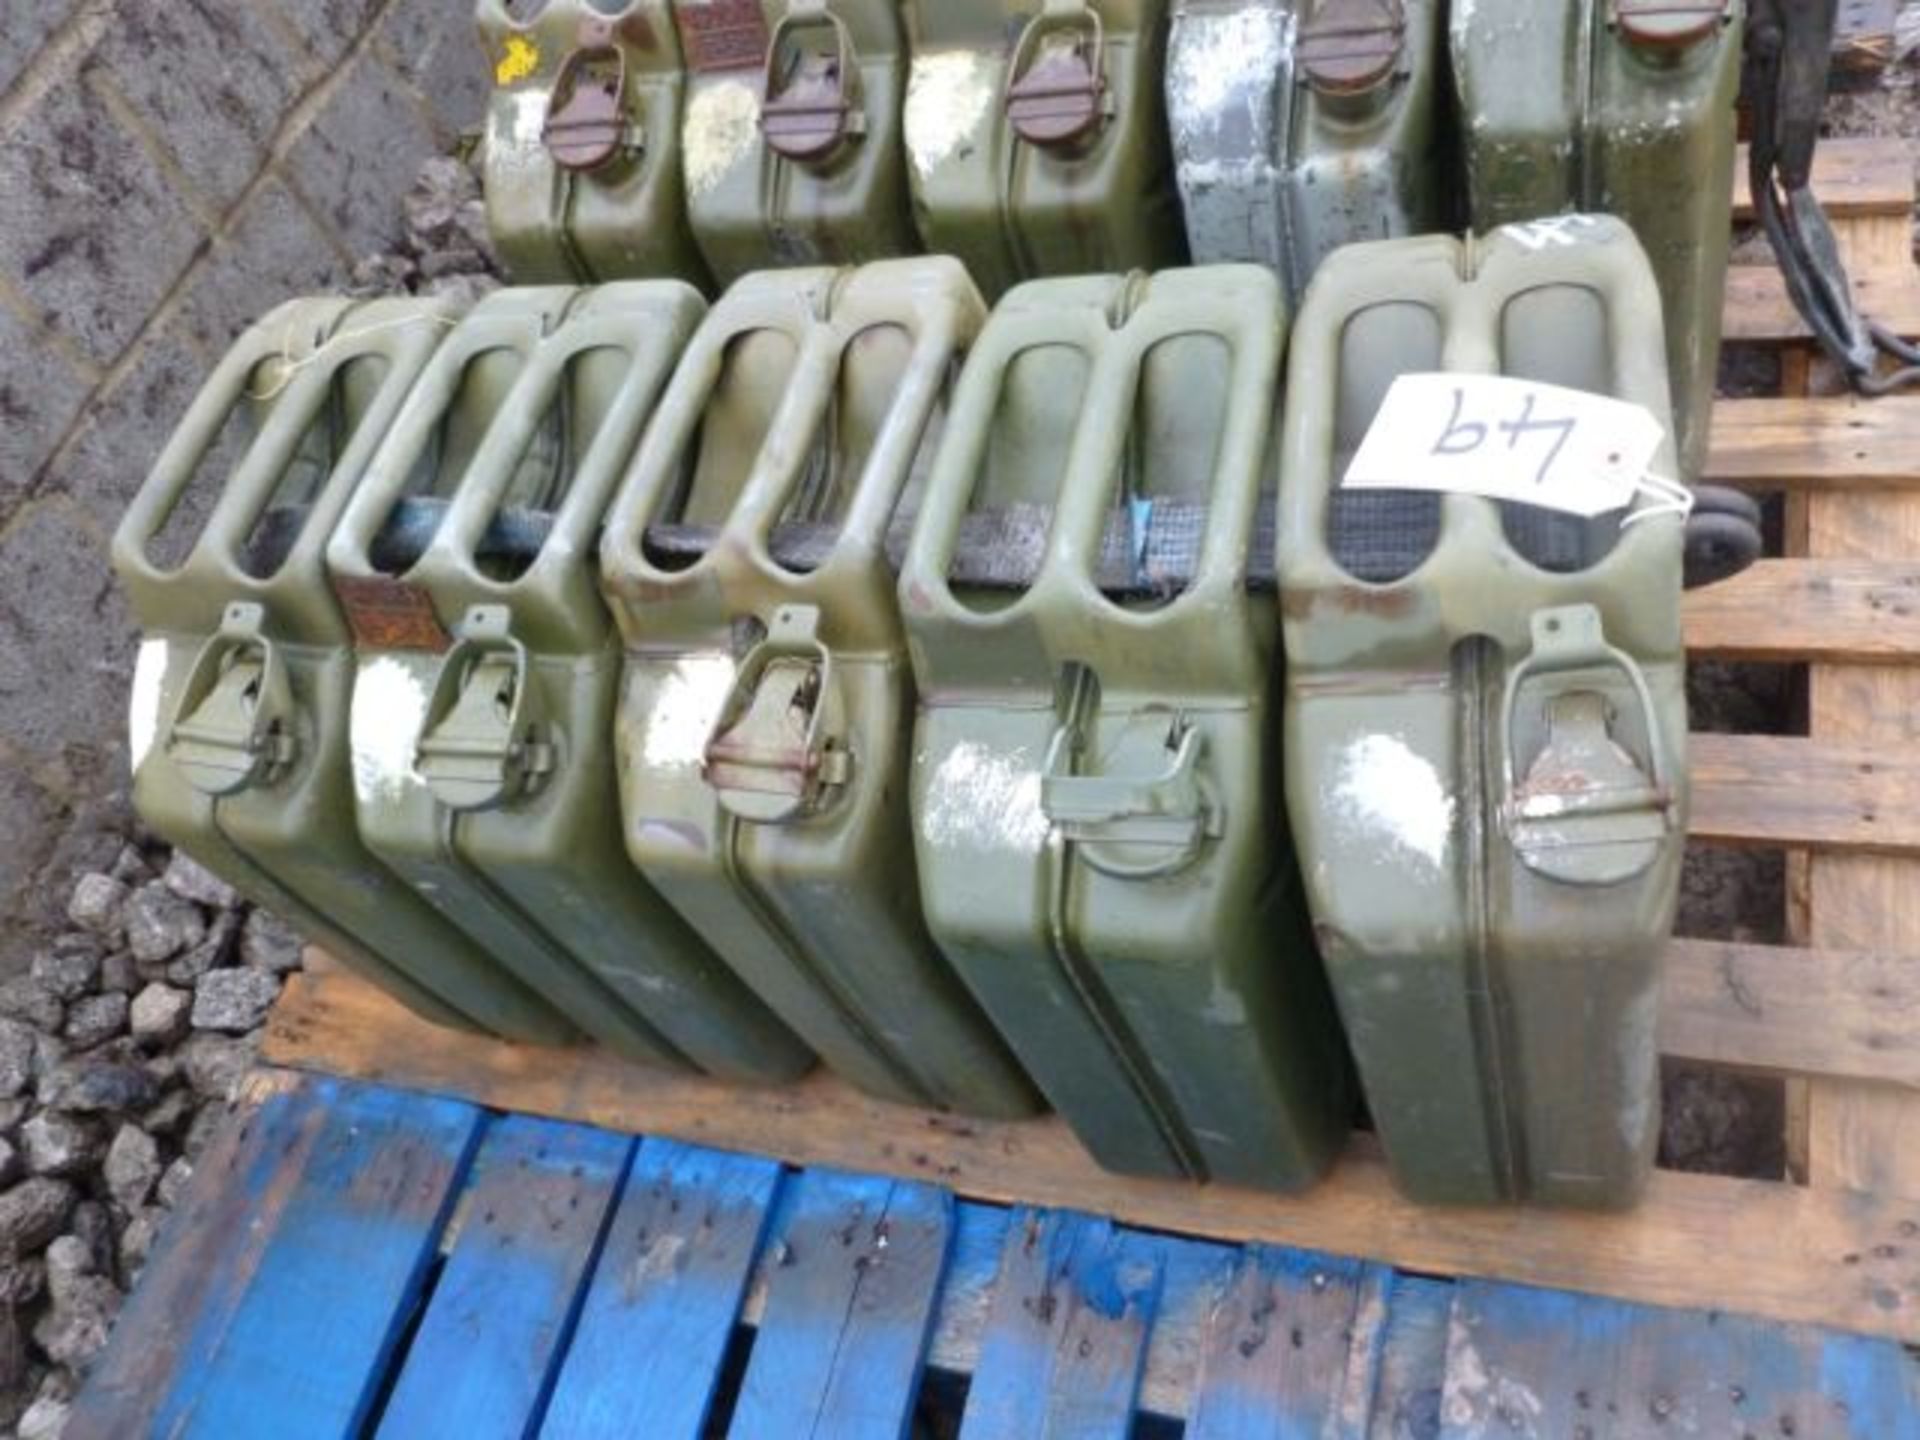 5 x Jerry Cans   Subcategory:Garage Tools / Sundries  V5:  Plate:  MOT: